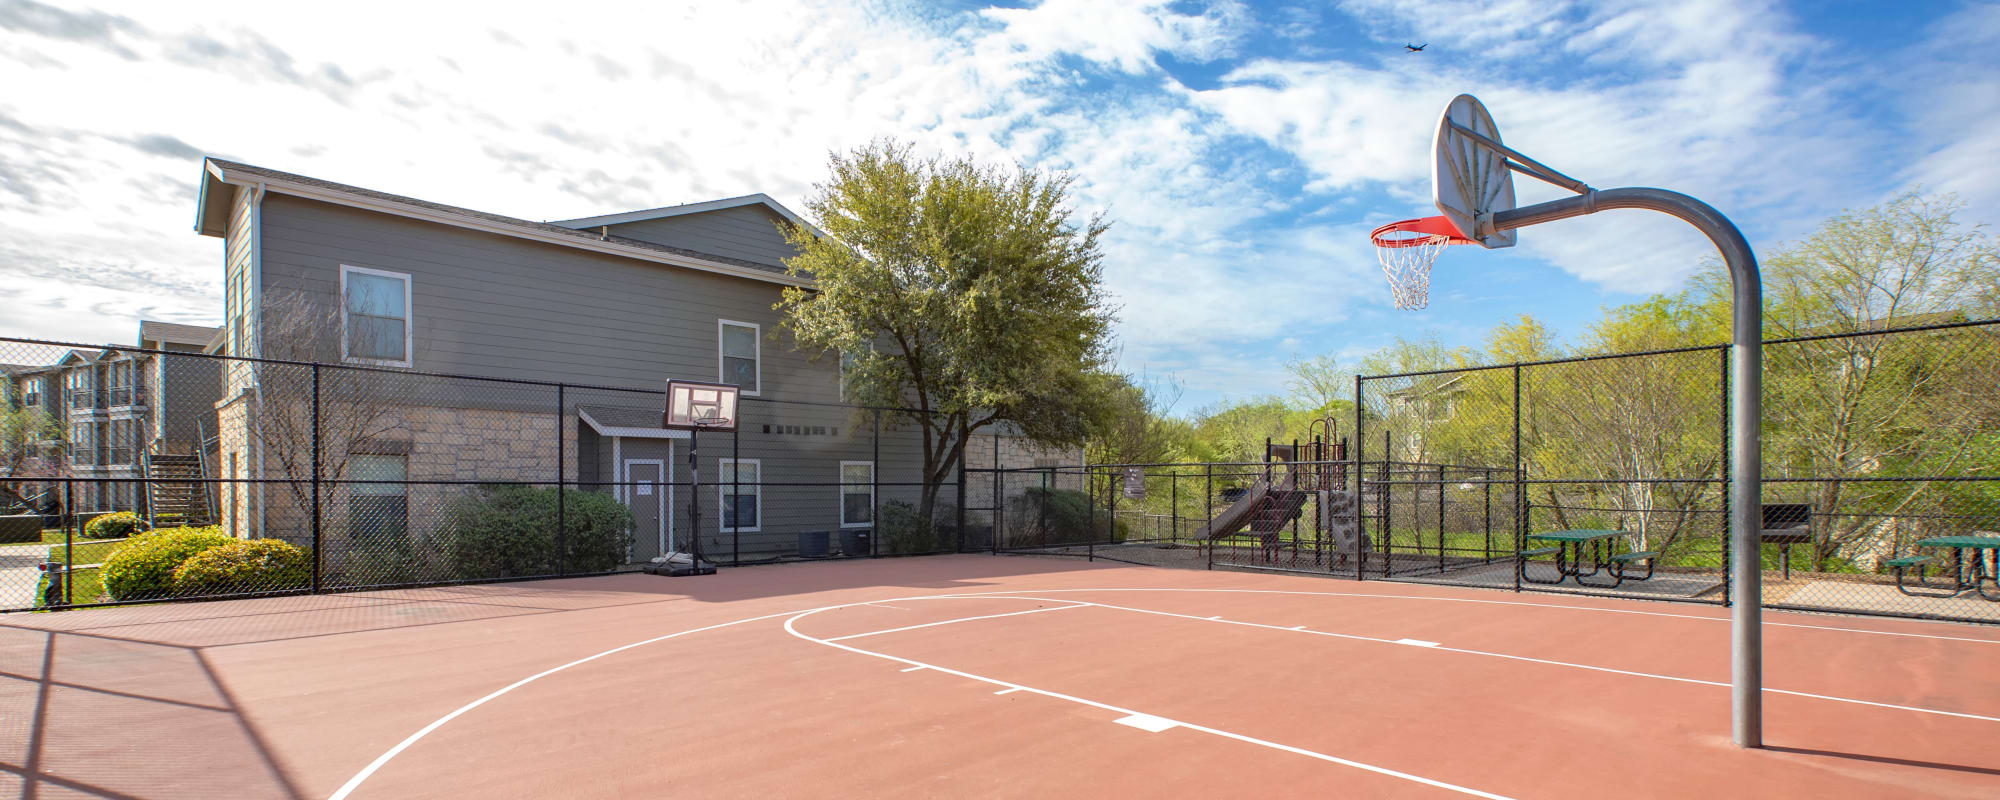 Our Apartments in Universal City, Texas offer an Outdoor Basketball Court